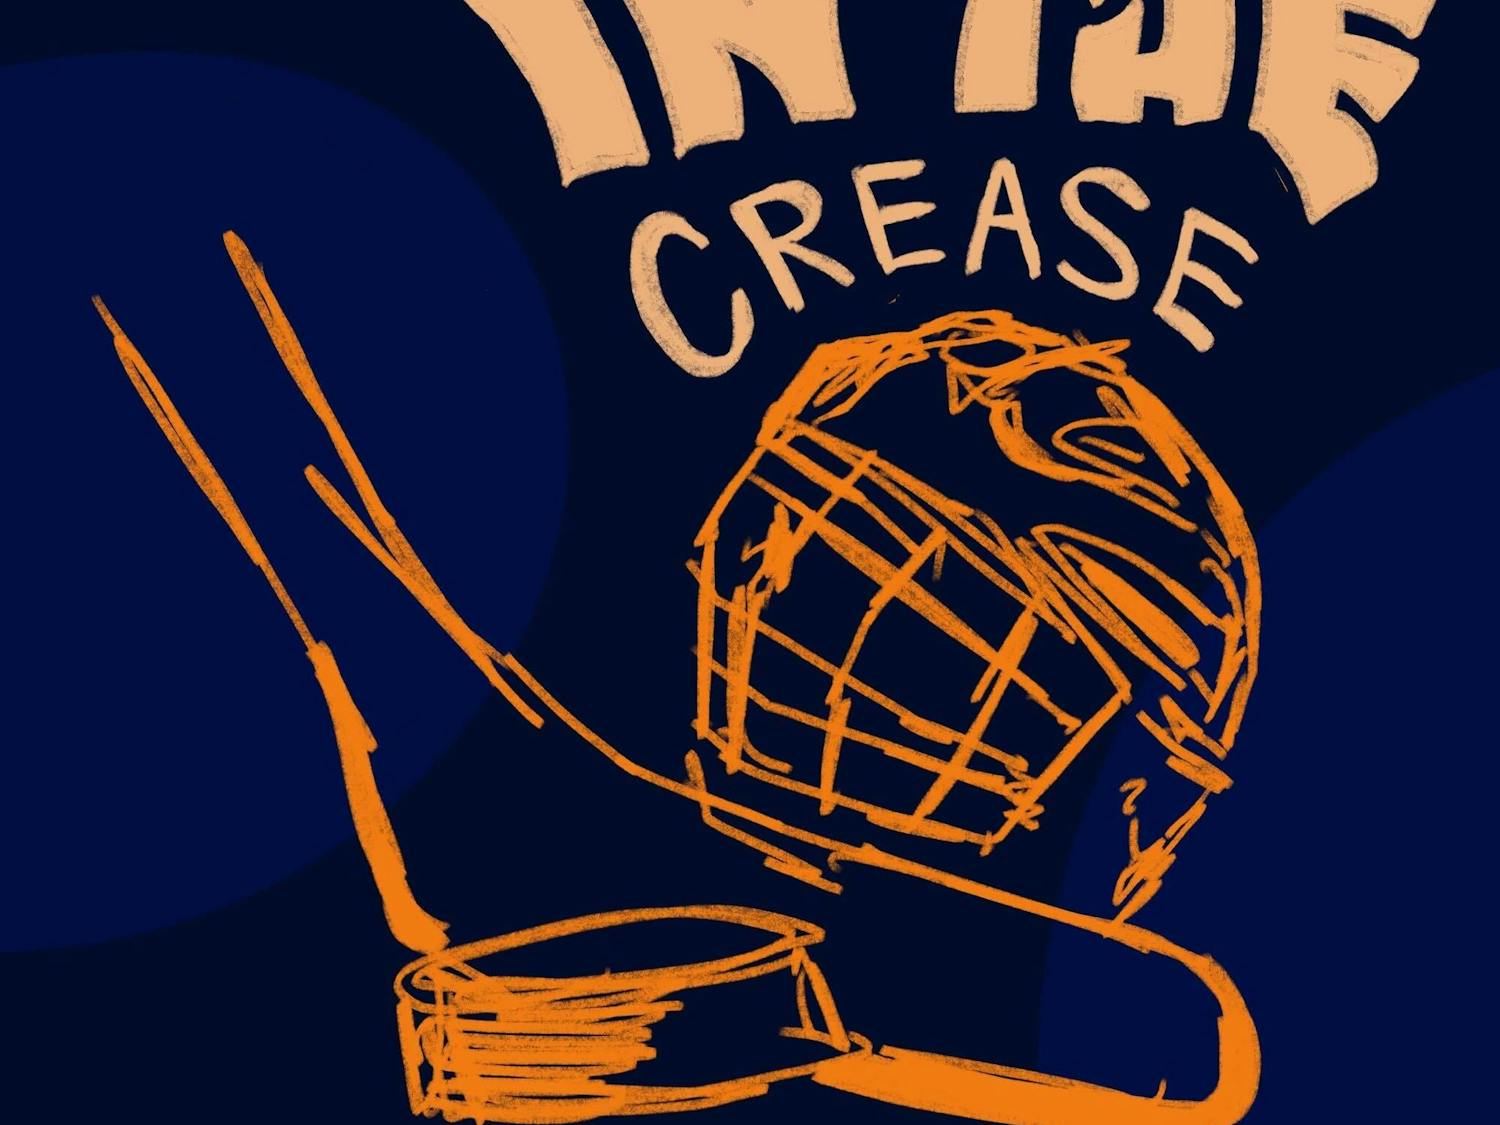 FIXED graphic for Zach Gerson's column "In The Crease"